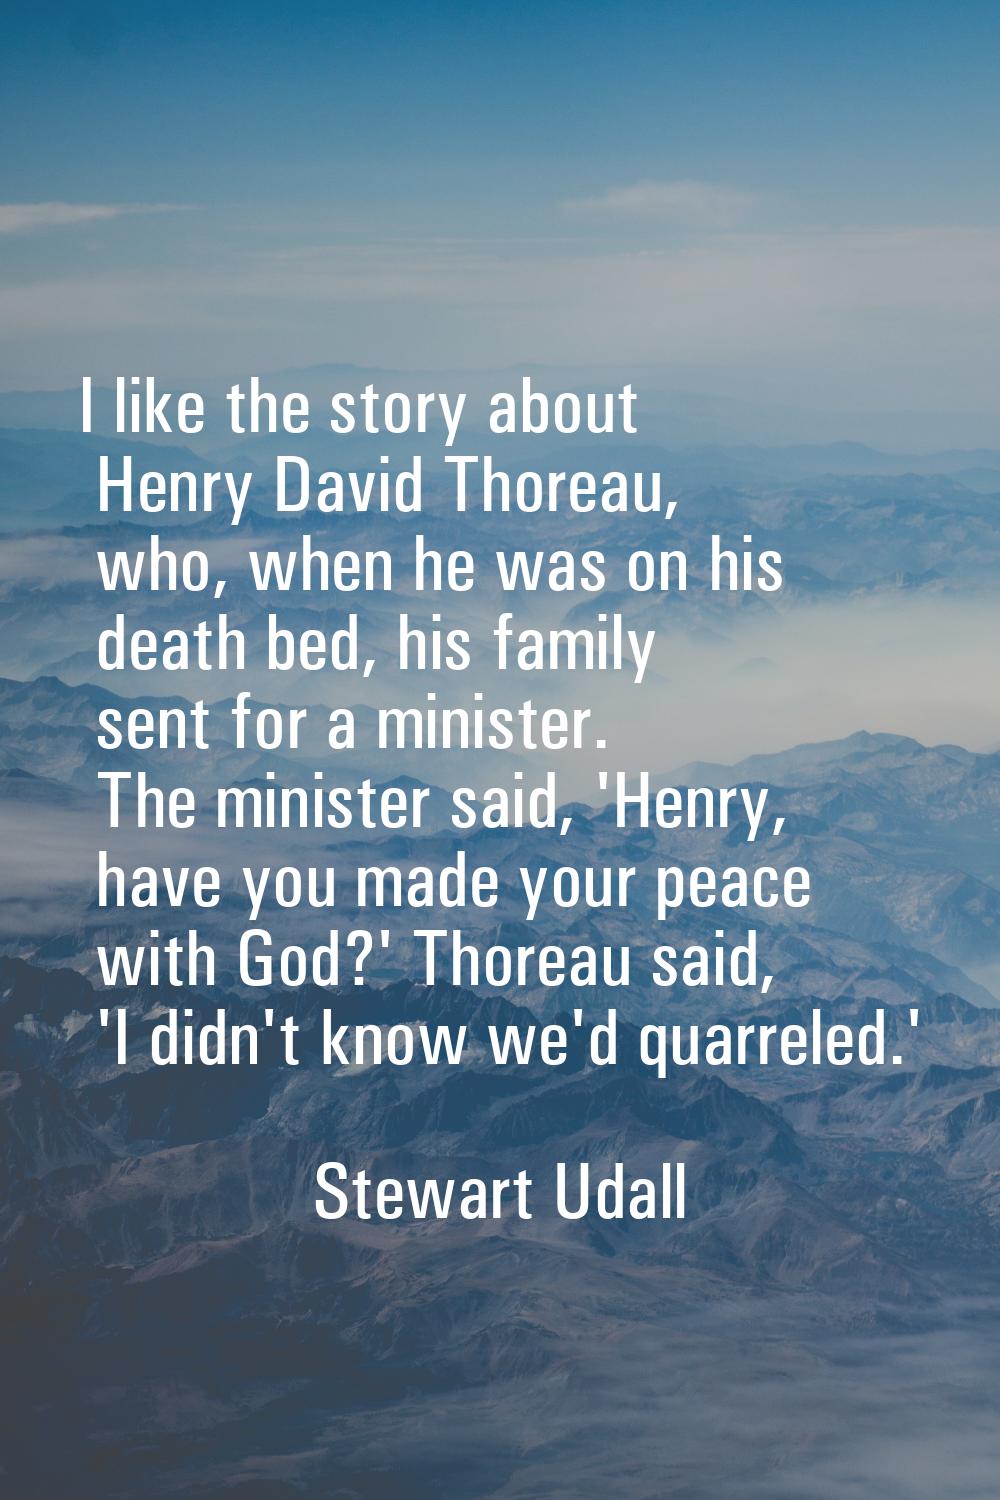 I like the story about Henry David Thoreau, who, when he was on his death bed, his family sent for 